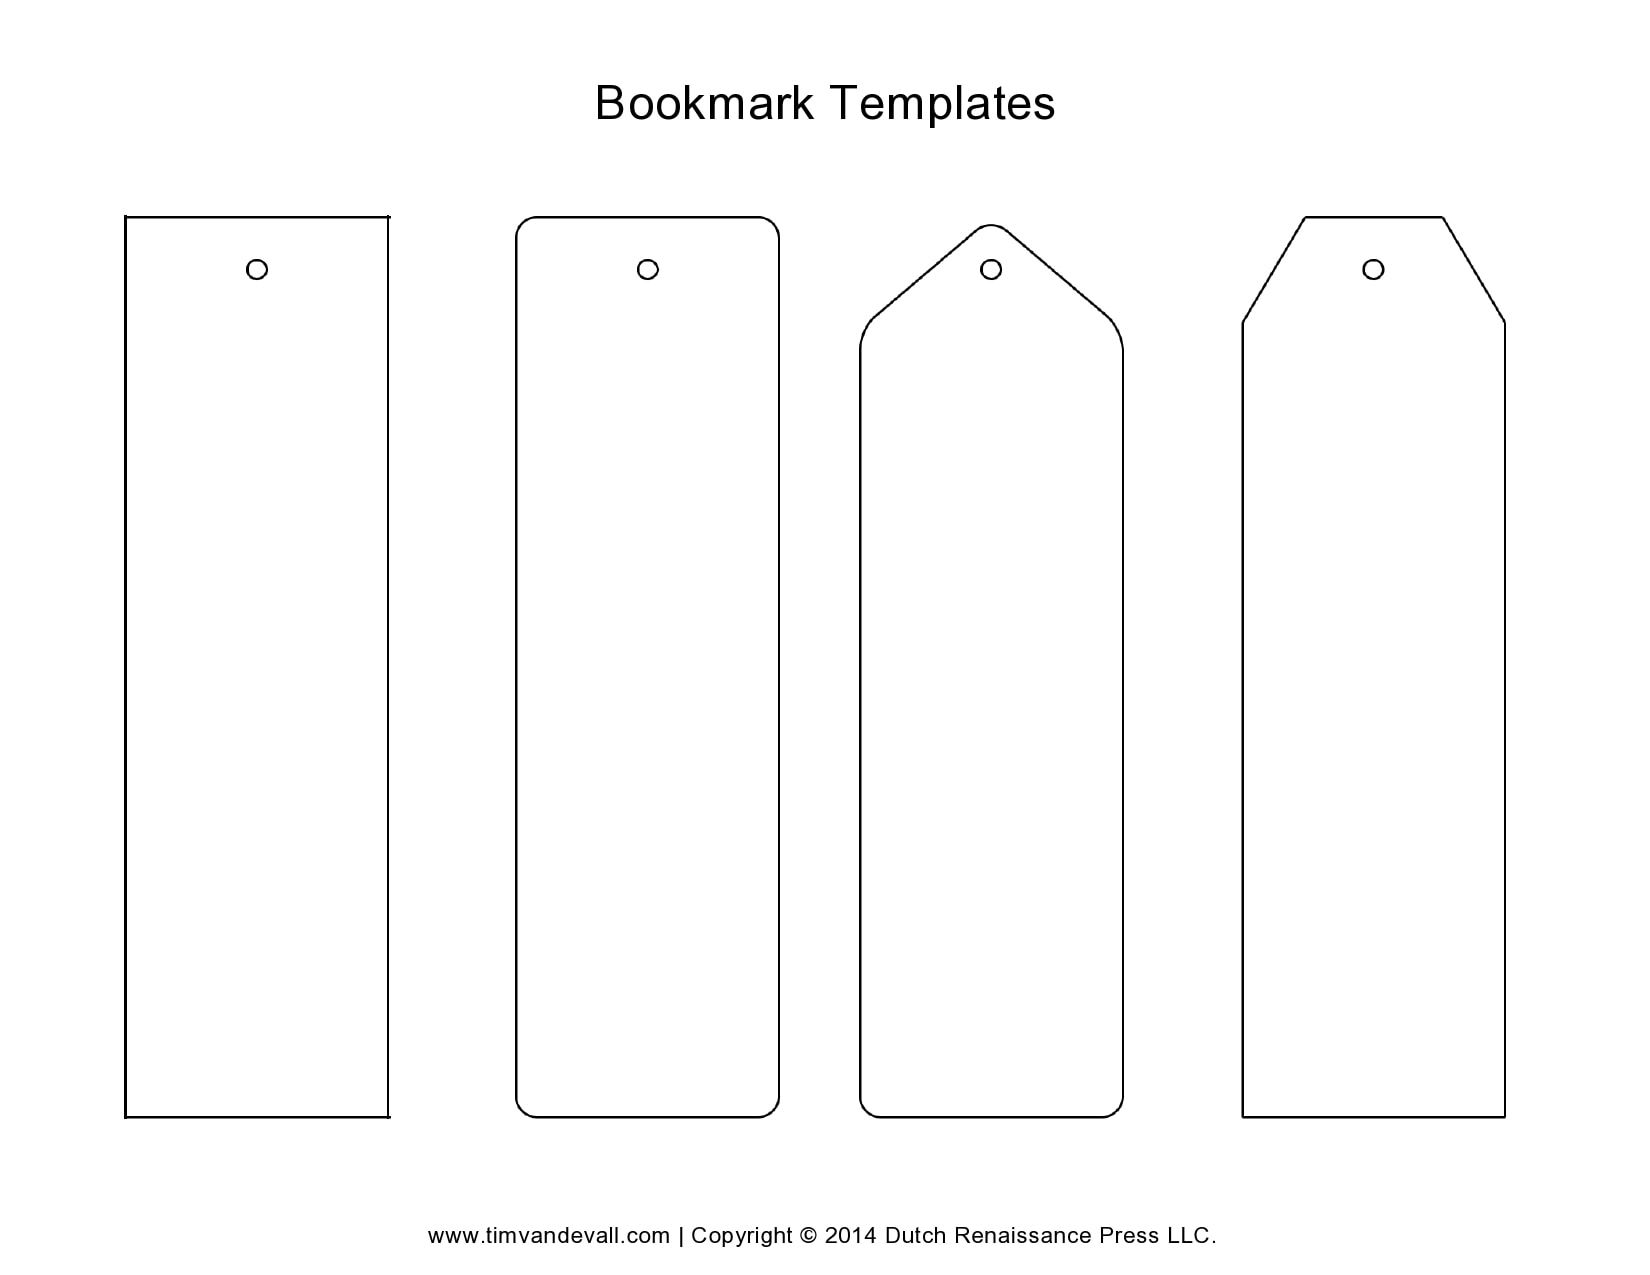 30 Free Bookmark Templates Word PDF Bookmark Template Coloring Bookmarks Bookmark Craft